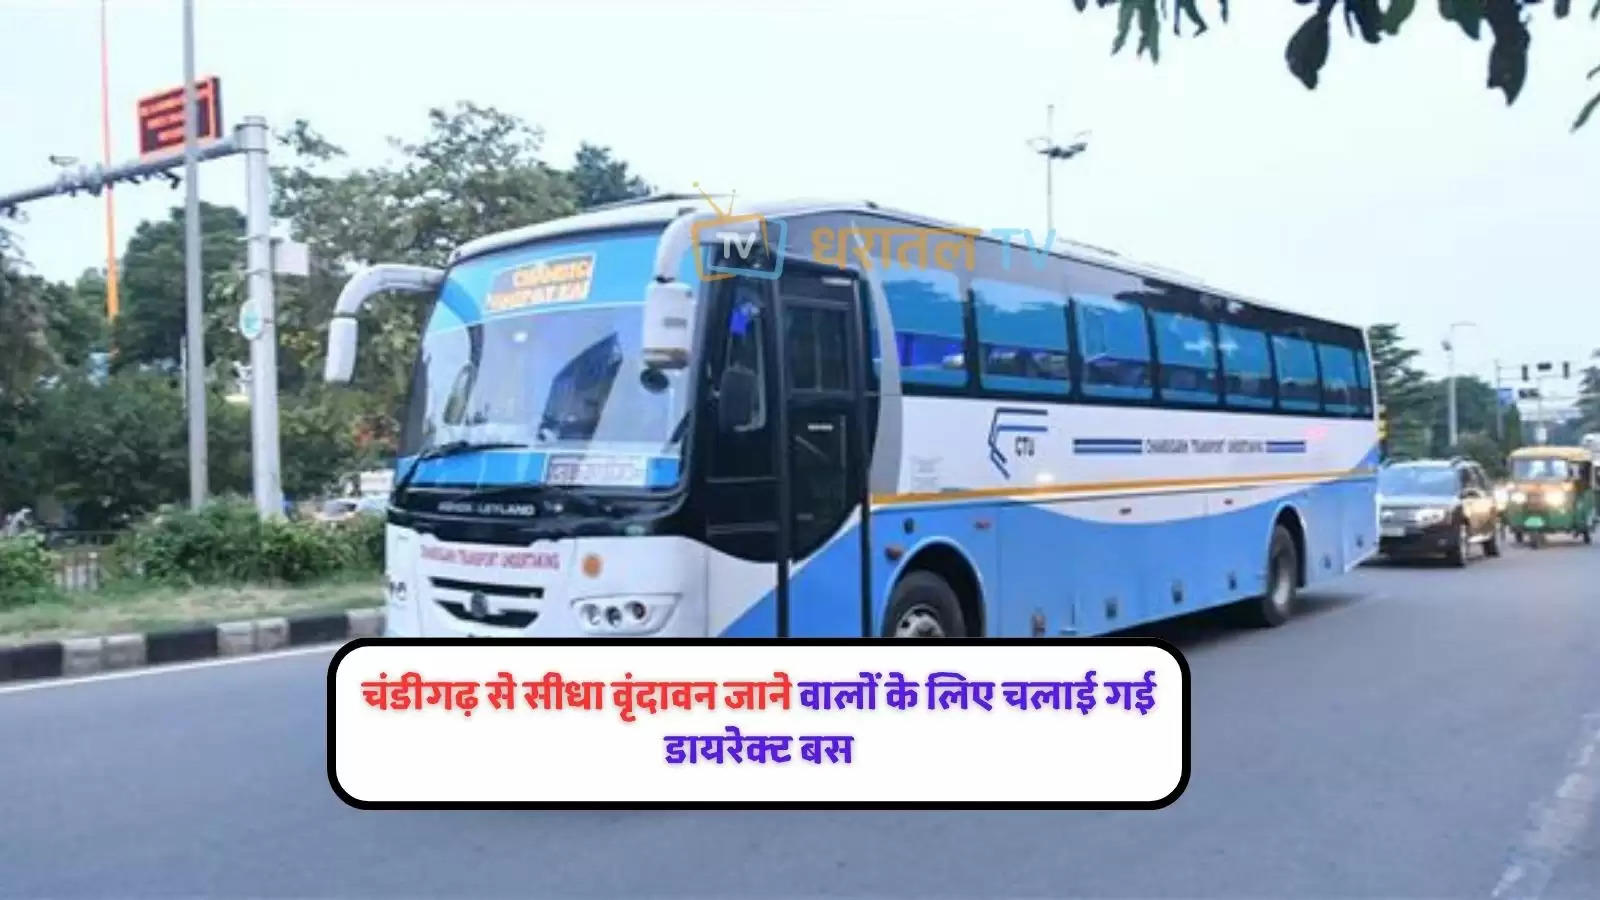 ctu-bus-now-vrindavan-will-be-able-to-go-directly-from